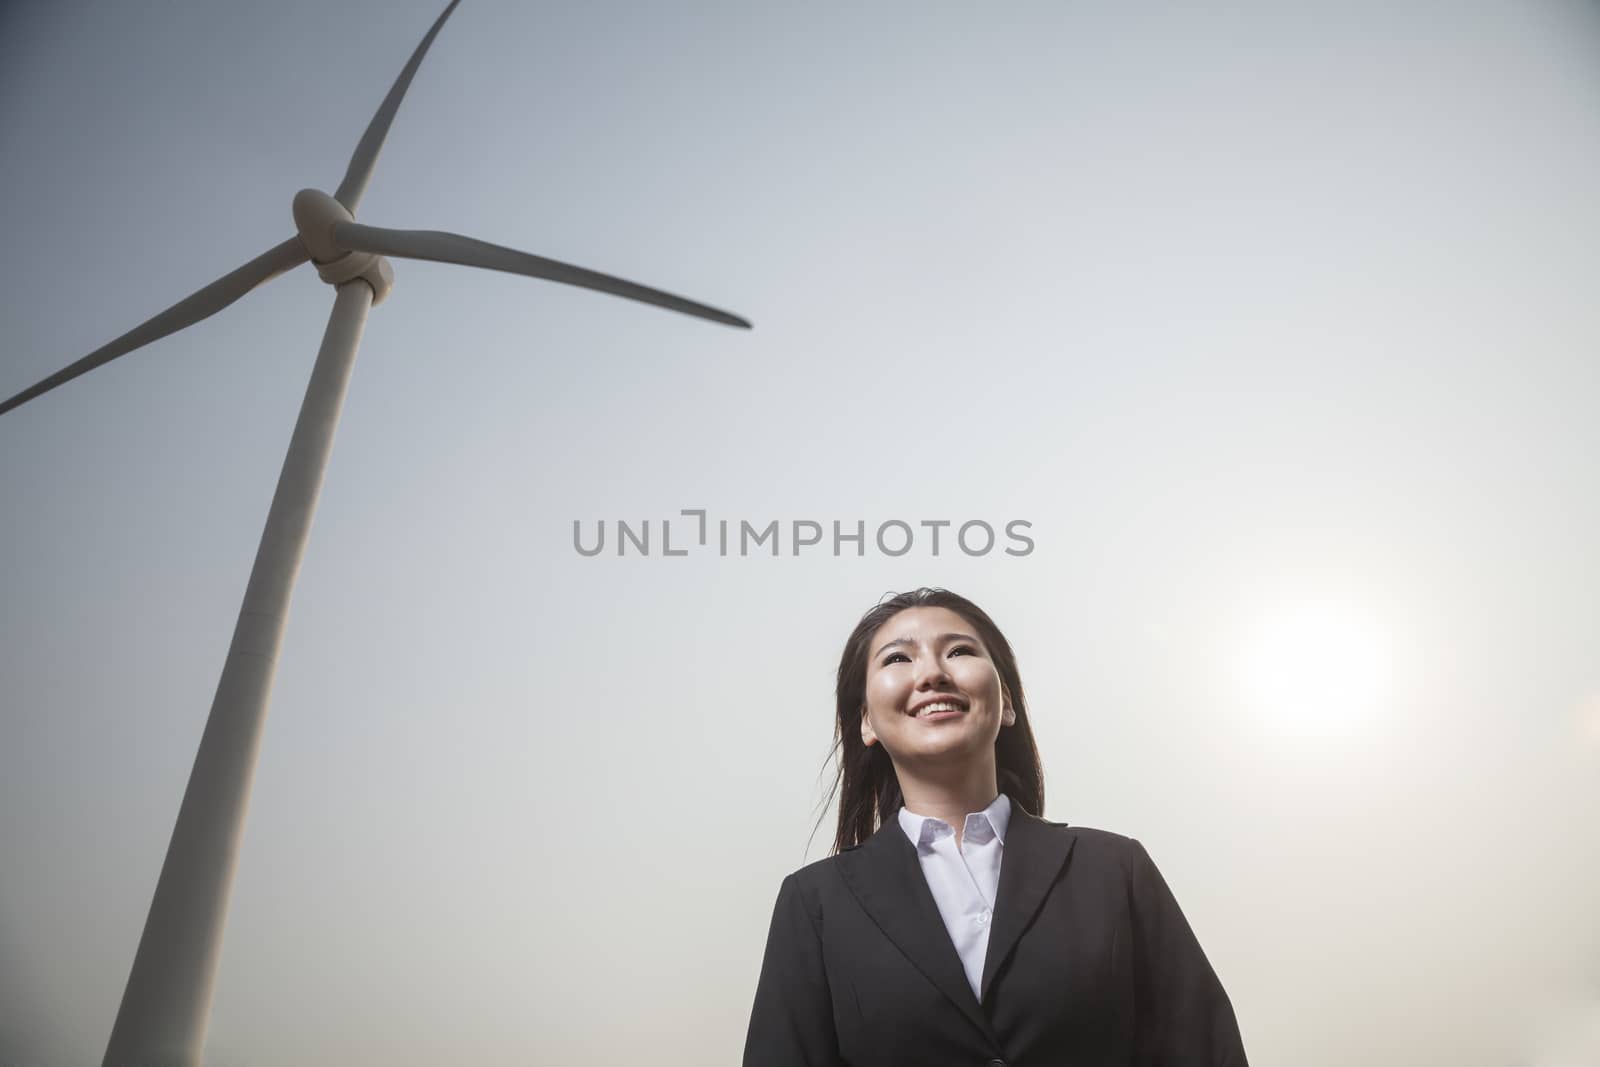 Portrait of smiling young businesswoman standing by a wind turbine